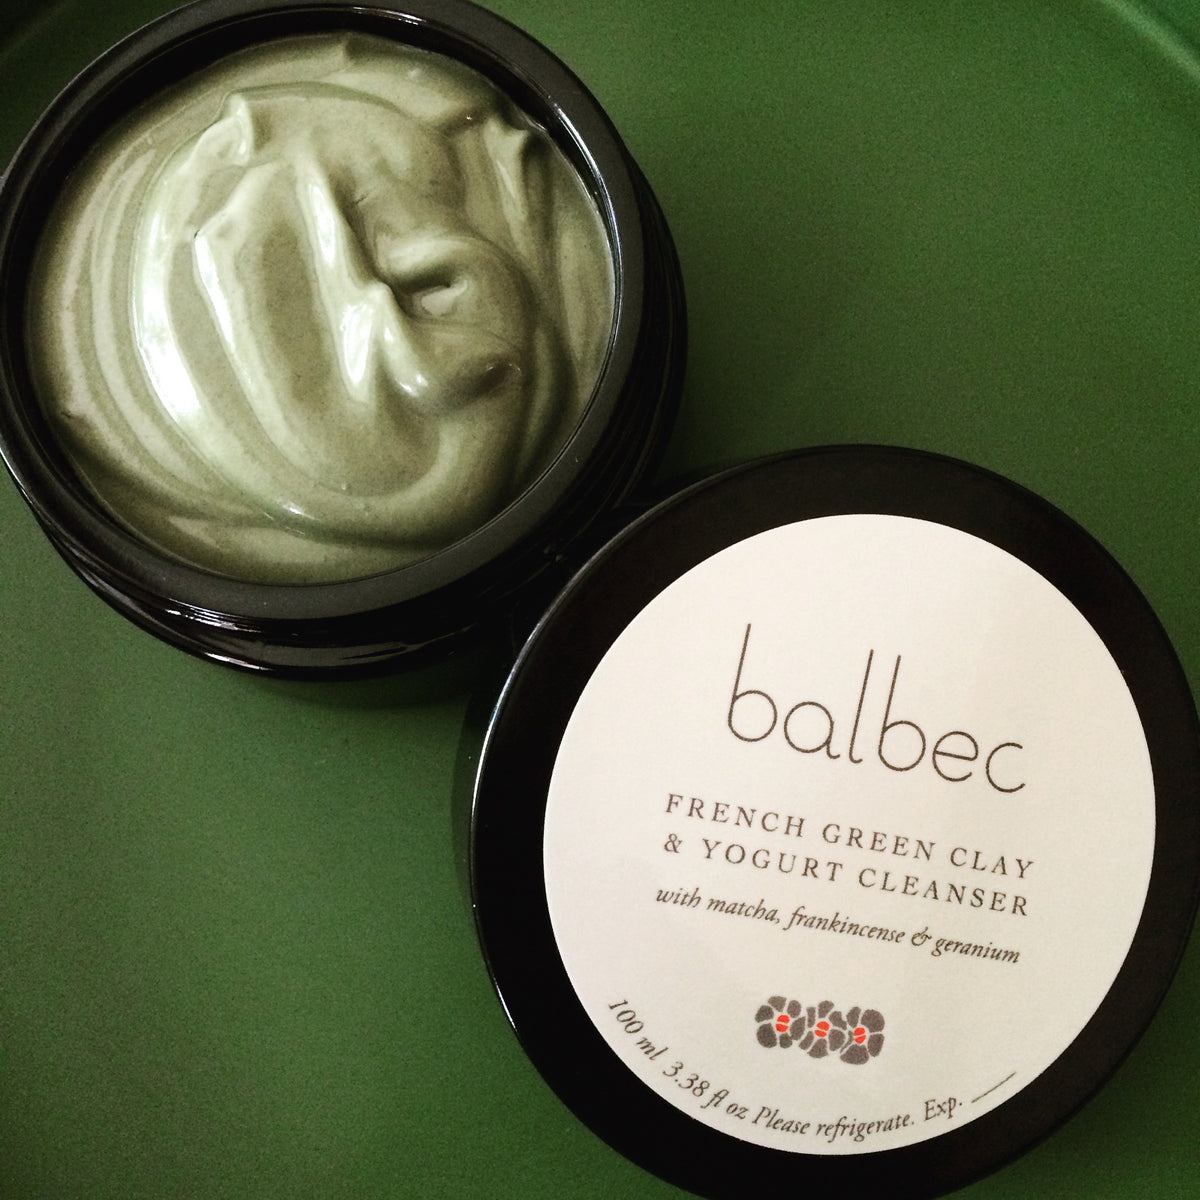 Balbec beauty: French Green Clay and Yogurt Cleanse with Matcha, Frankincense, & Geranium. A perfect cleanse. Our fresh. aromatherapeutic, probiotic clay and yogurt cleansers help detoxify, nourish, and hydrate your skin. This is lush, slow beauty.